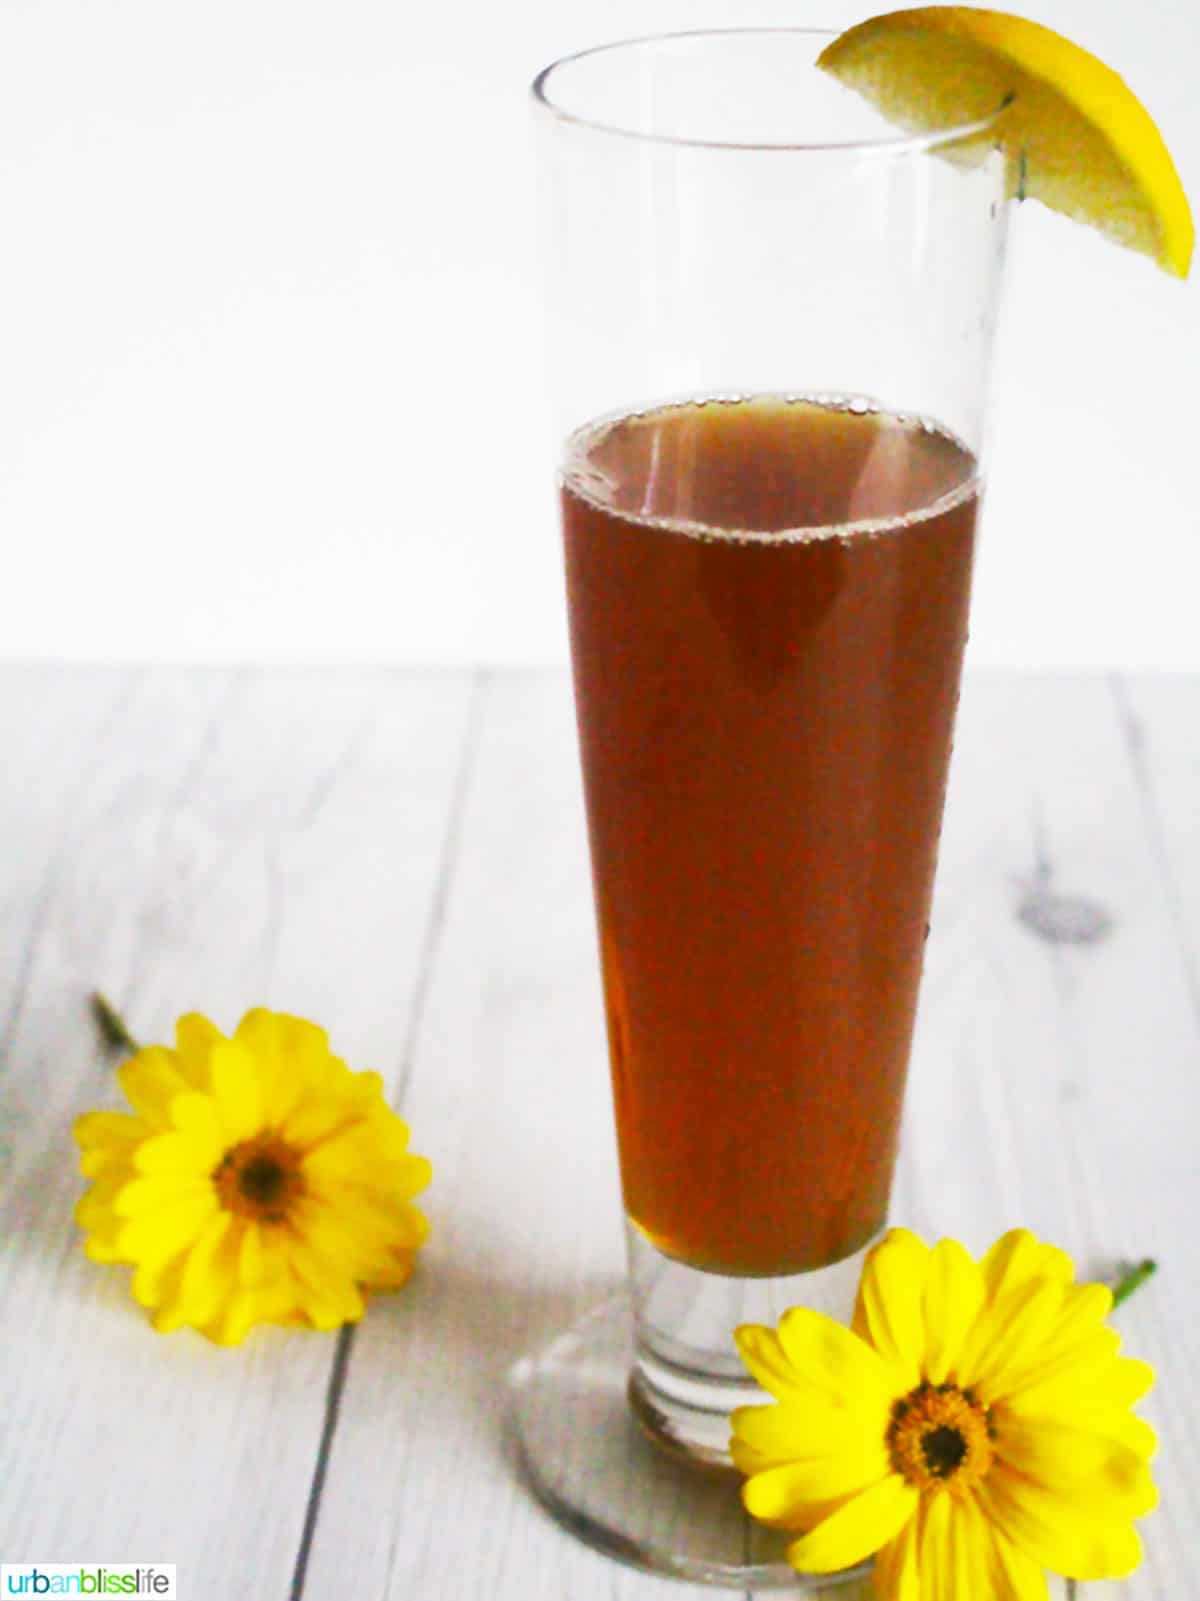 iced tea and beer cocktail with yellow flowers and garnished with lemon wedge.